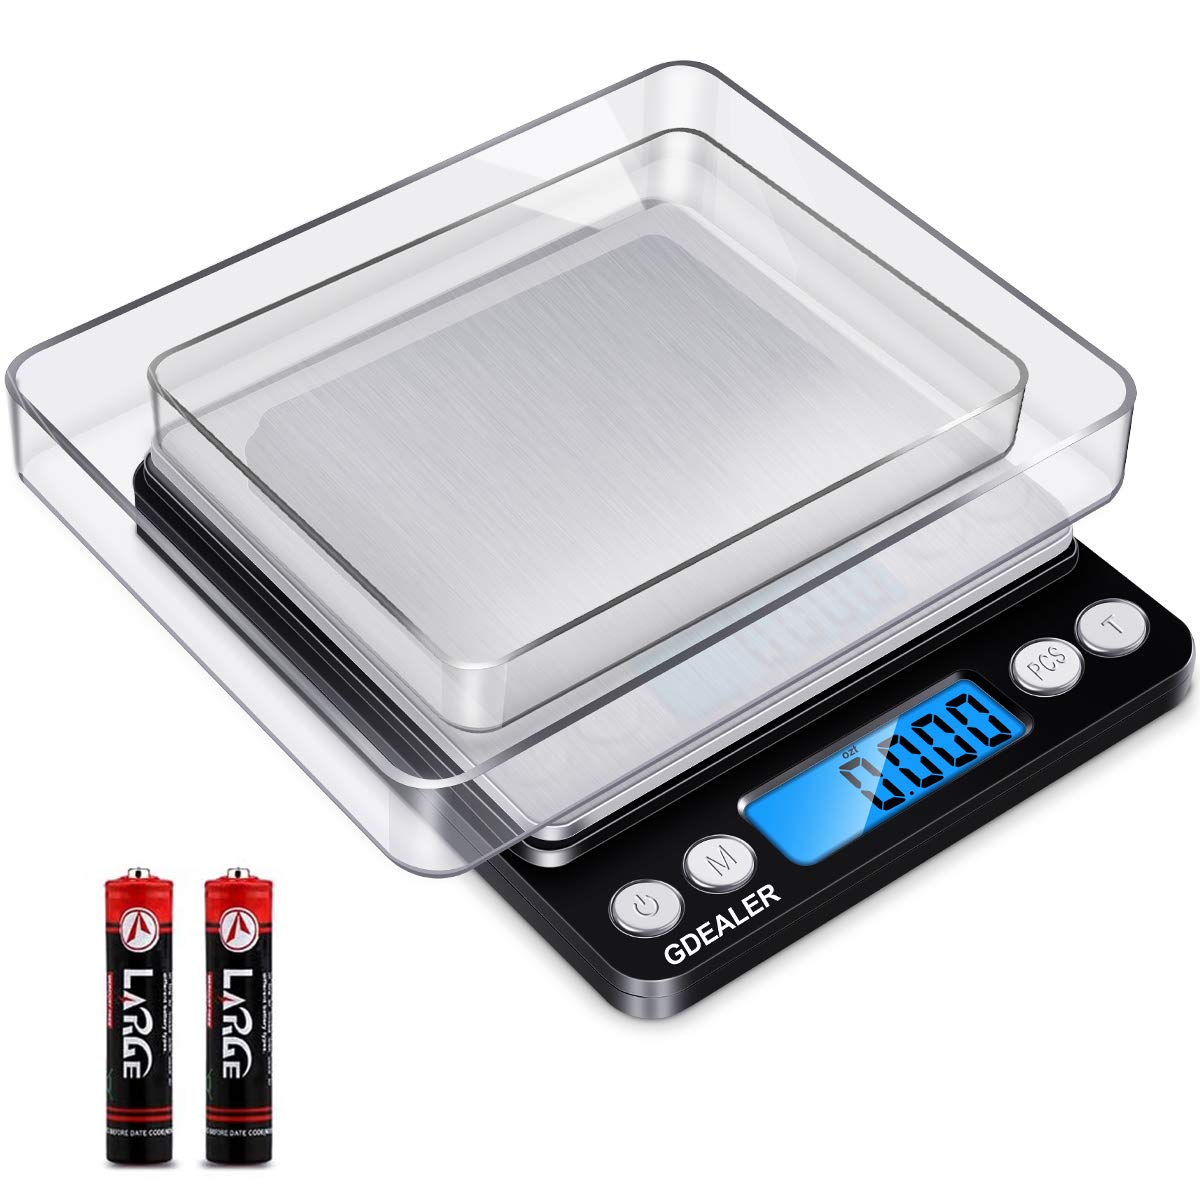 GDEALER Digital Pocket Kitchen Scale 0.001oz/0.01g 500g Kitchen Food Scale Jewelry Weight Compact Scale, Tare, Stainless Steel, Backlit Display, Black